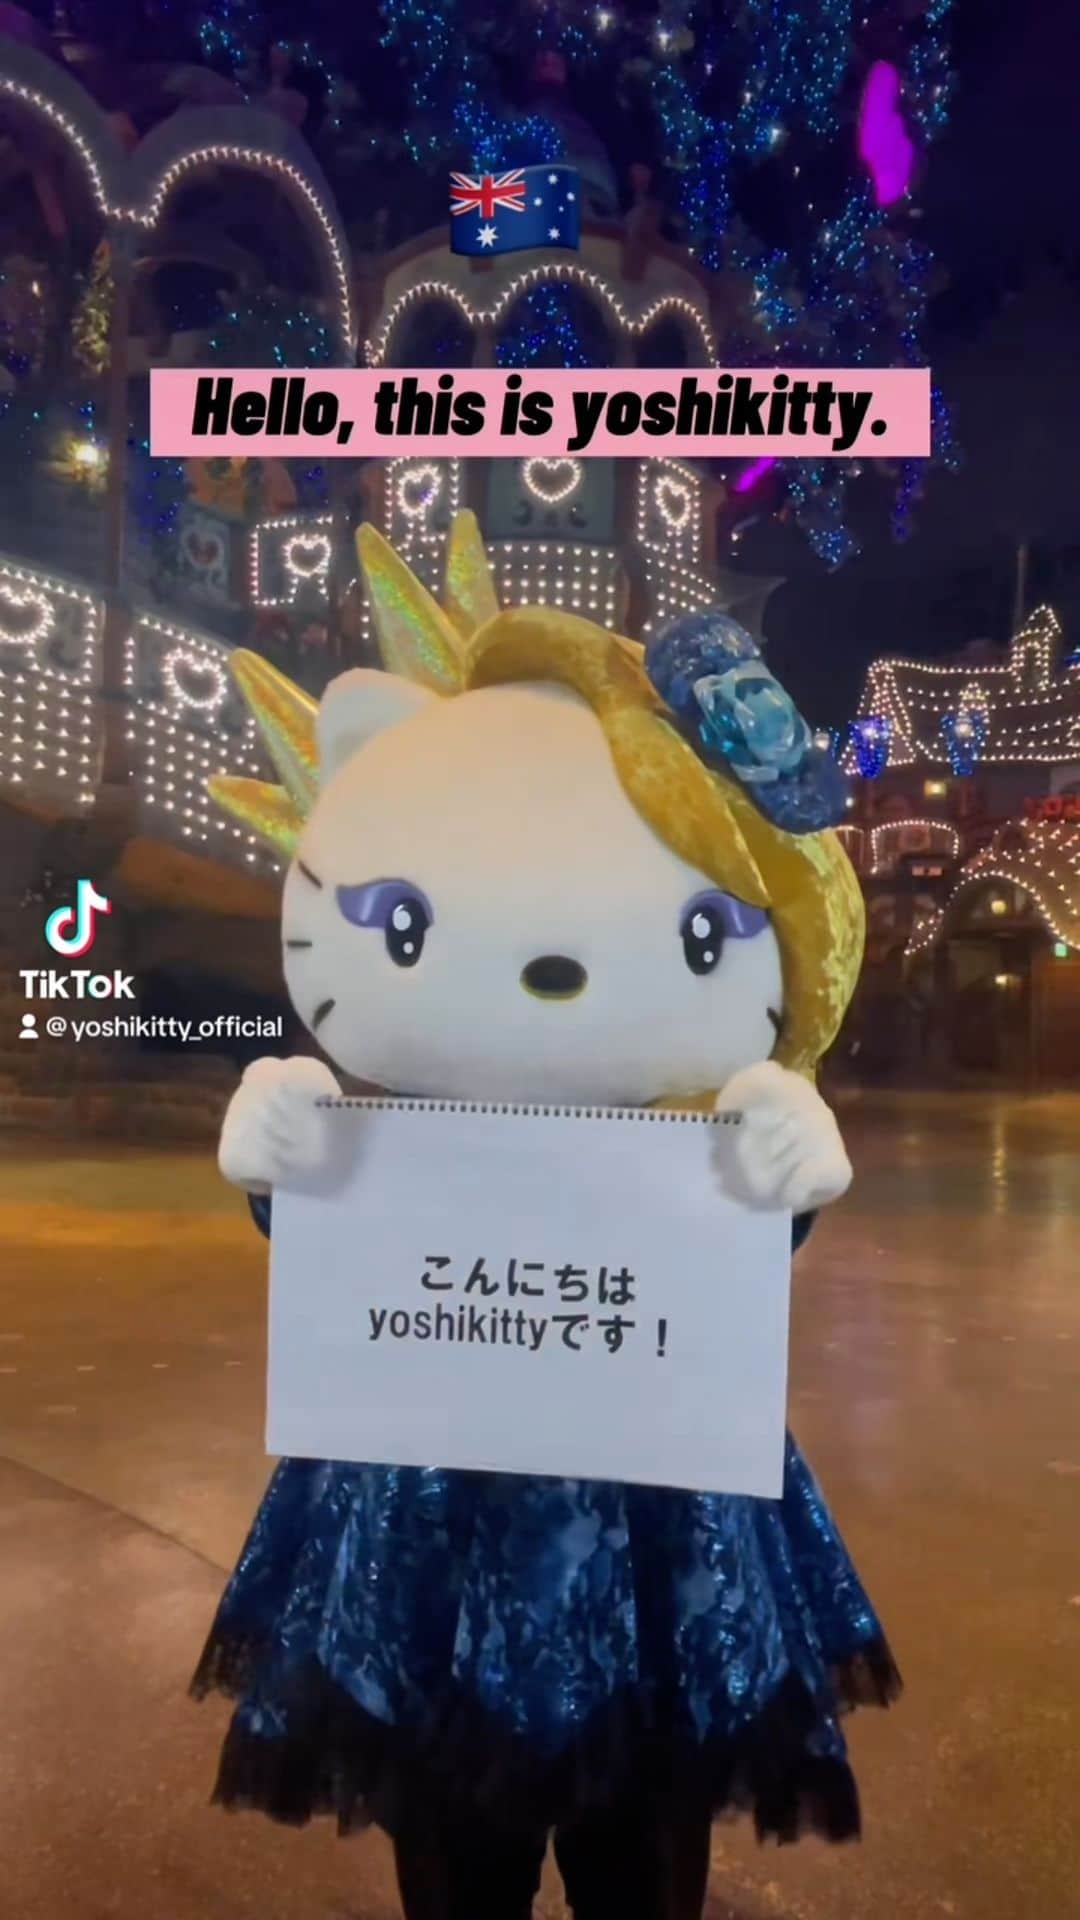 Yoshikittyのインスタグラム：「Thank you to all the fans in Australia for voting for the Sanrio Character ranking♡  （link in bio）https://ranking.sanrio.co.jp/en/characters/yoshikitty/  @yoshikitty_official @yoshikiofficial  #yoshiki #sanrio #hellokitty #sanrioCharacterRanking #teamyoshikitty #yoshikitty #cinnamoroll #pompompurin #kuromi #pochacco #mymelody #littletwinstars #hangyodon #cogimyun #tuxedosam」